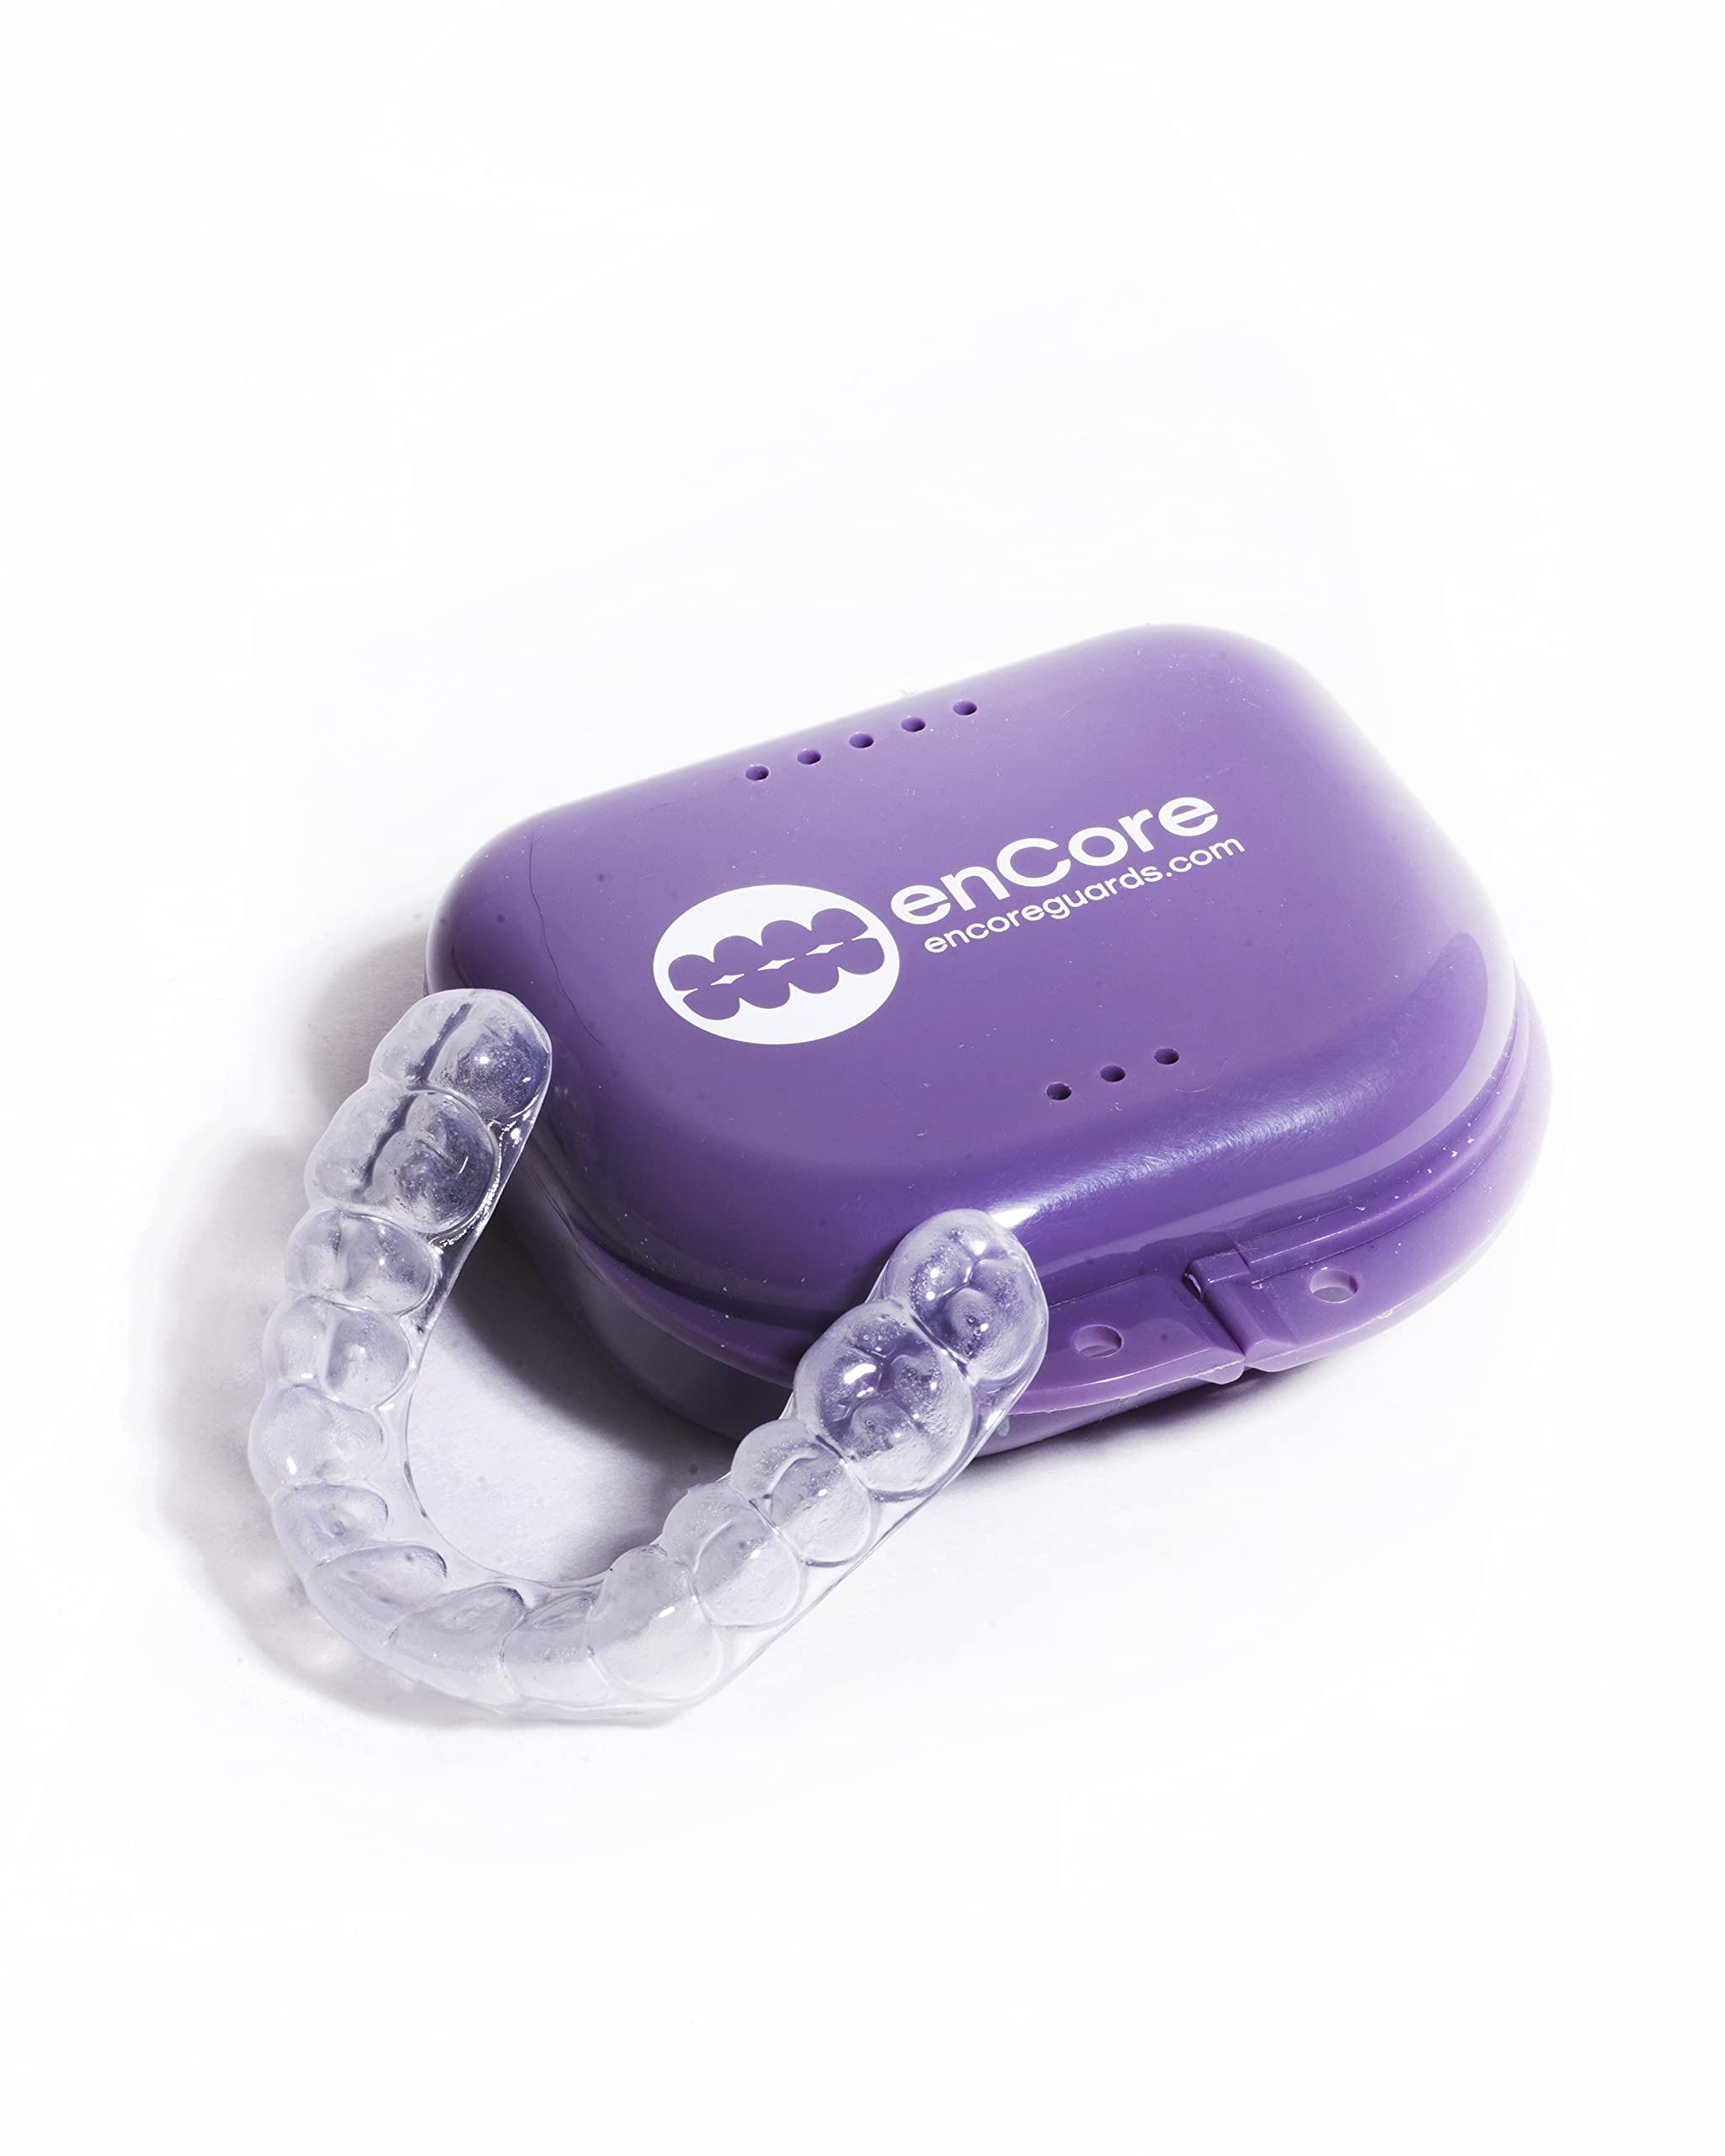 Soft Night Guard for Teeth Grinding & Clenching